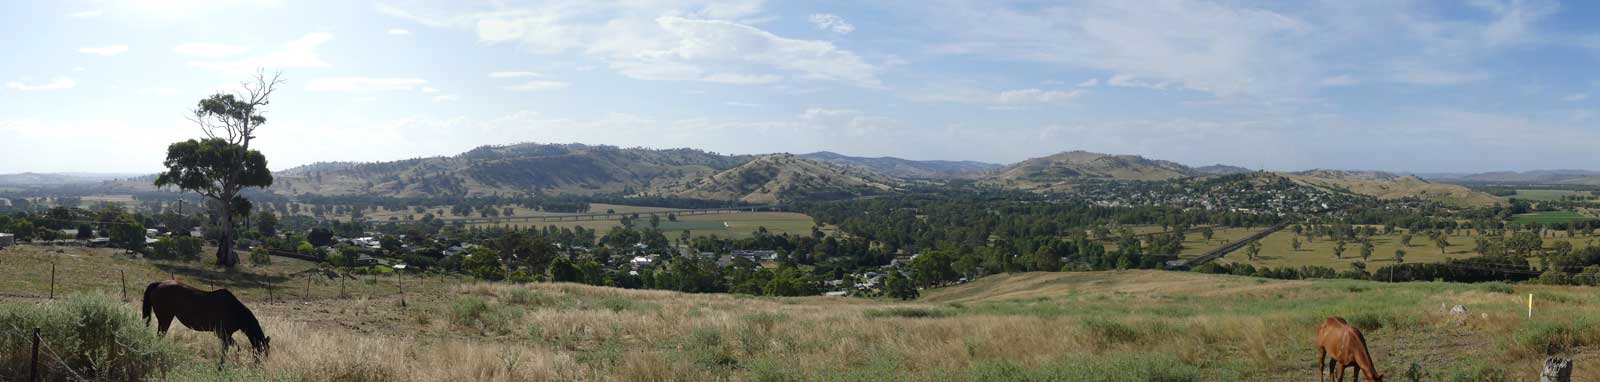 Looking out over the town of Gundagai